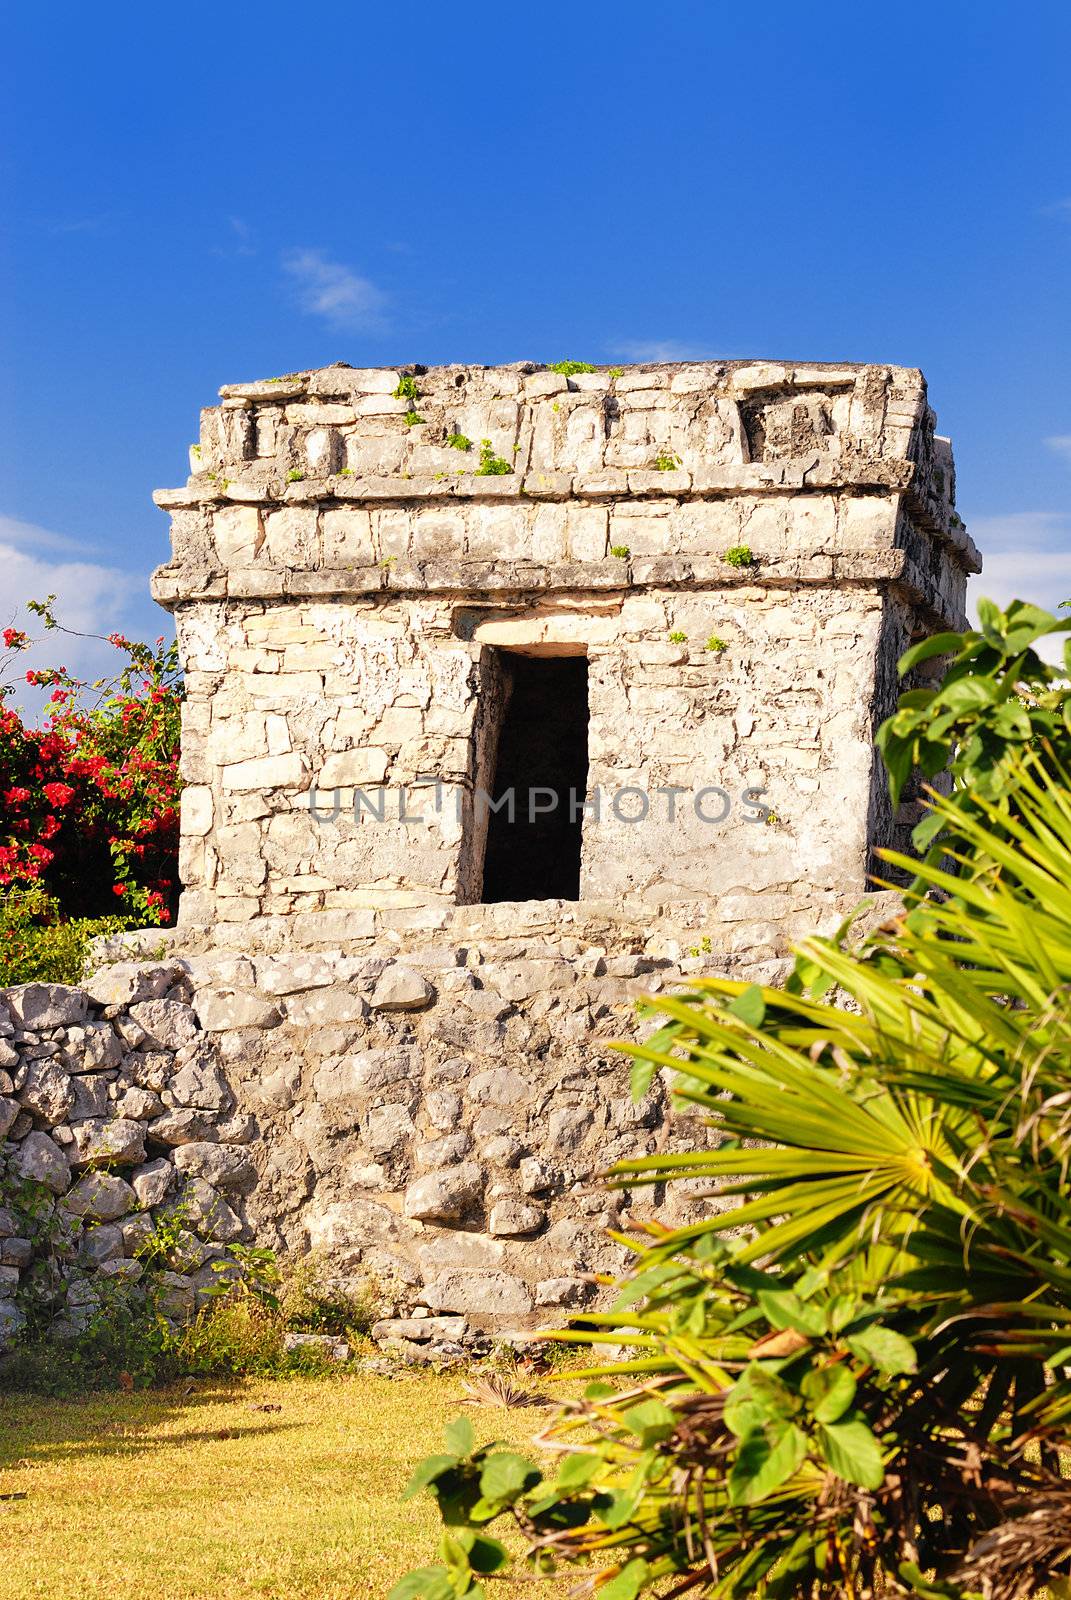 Mayan ruins of Tulum Mexico by ventdusud